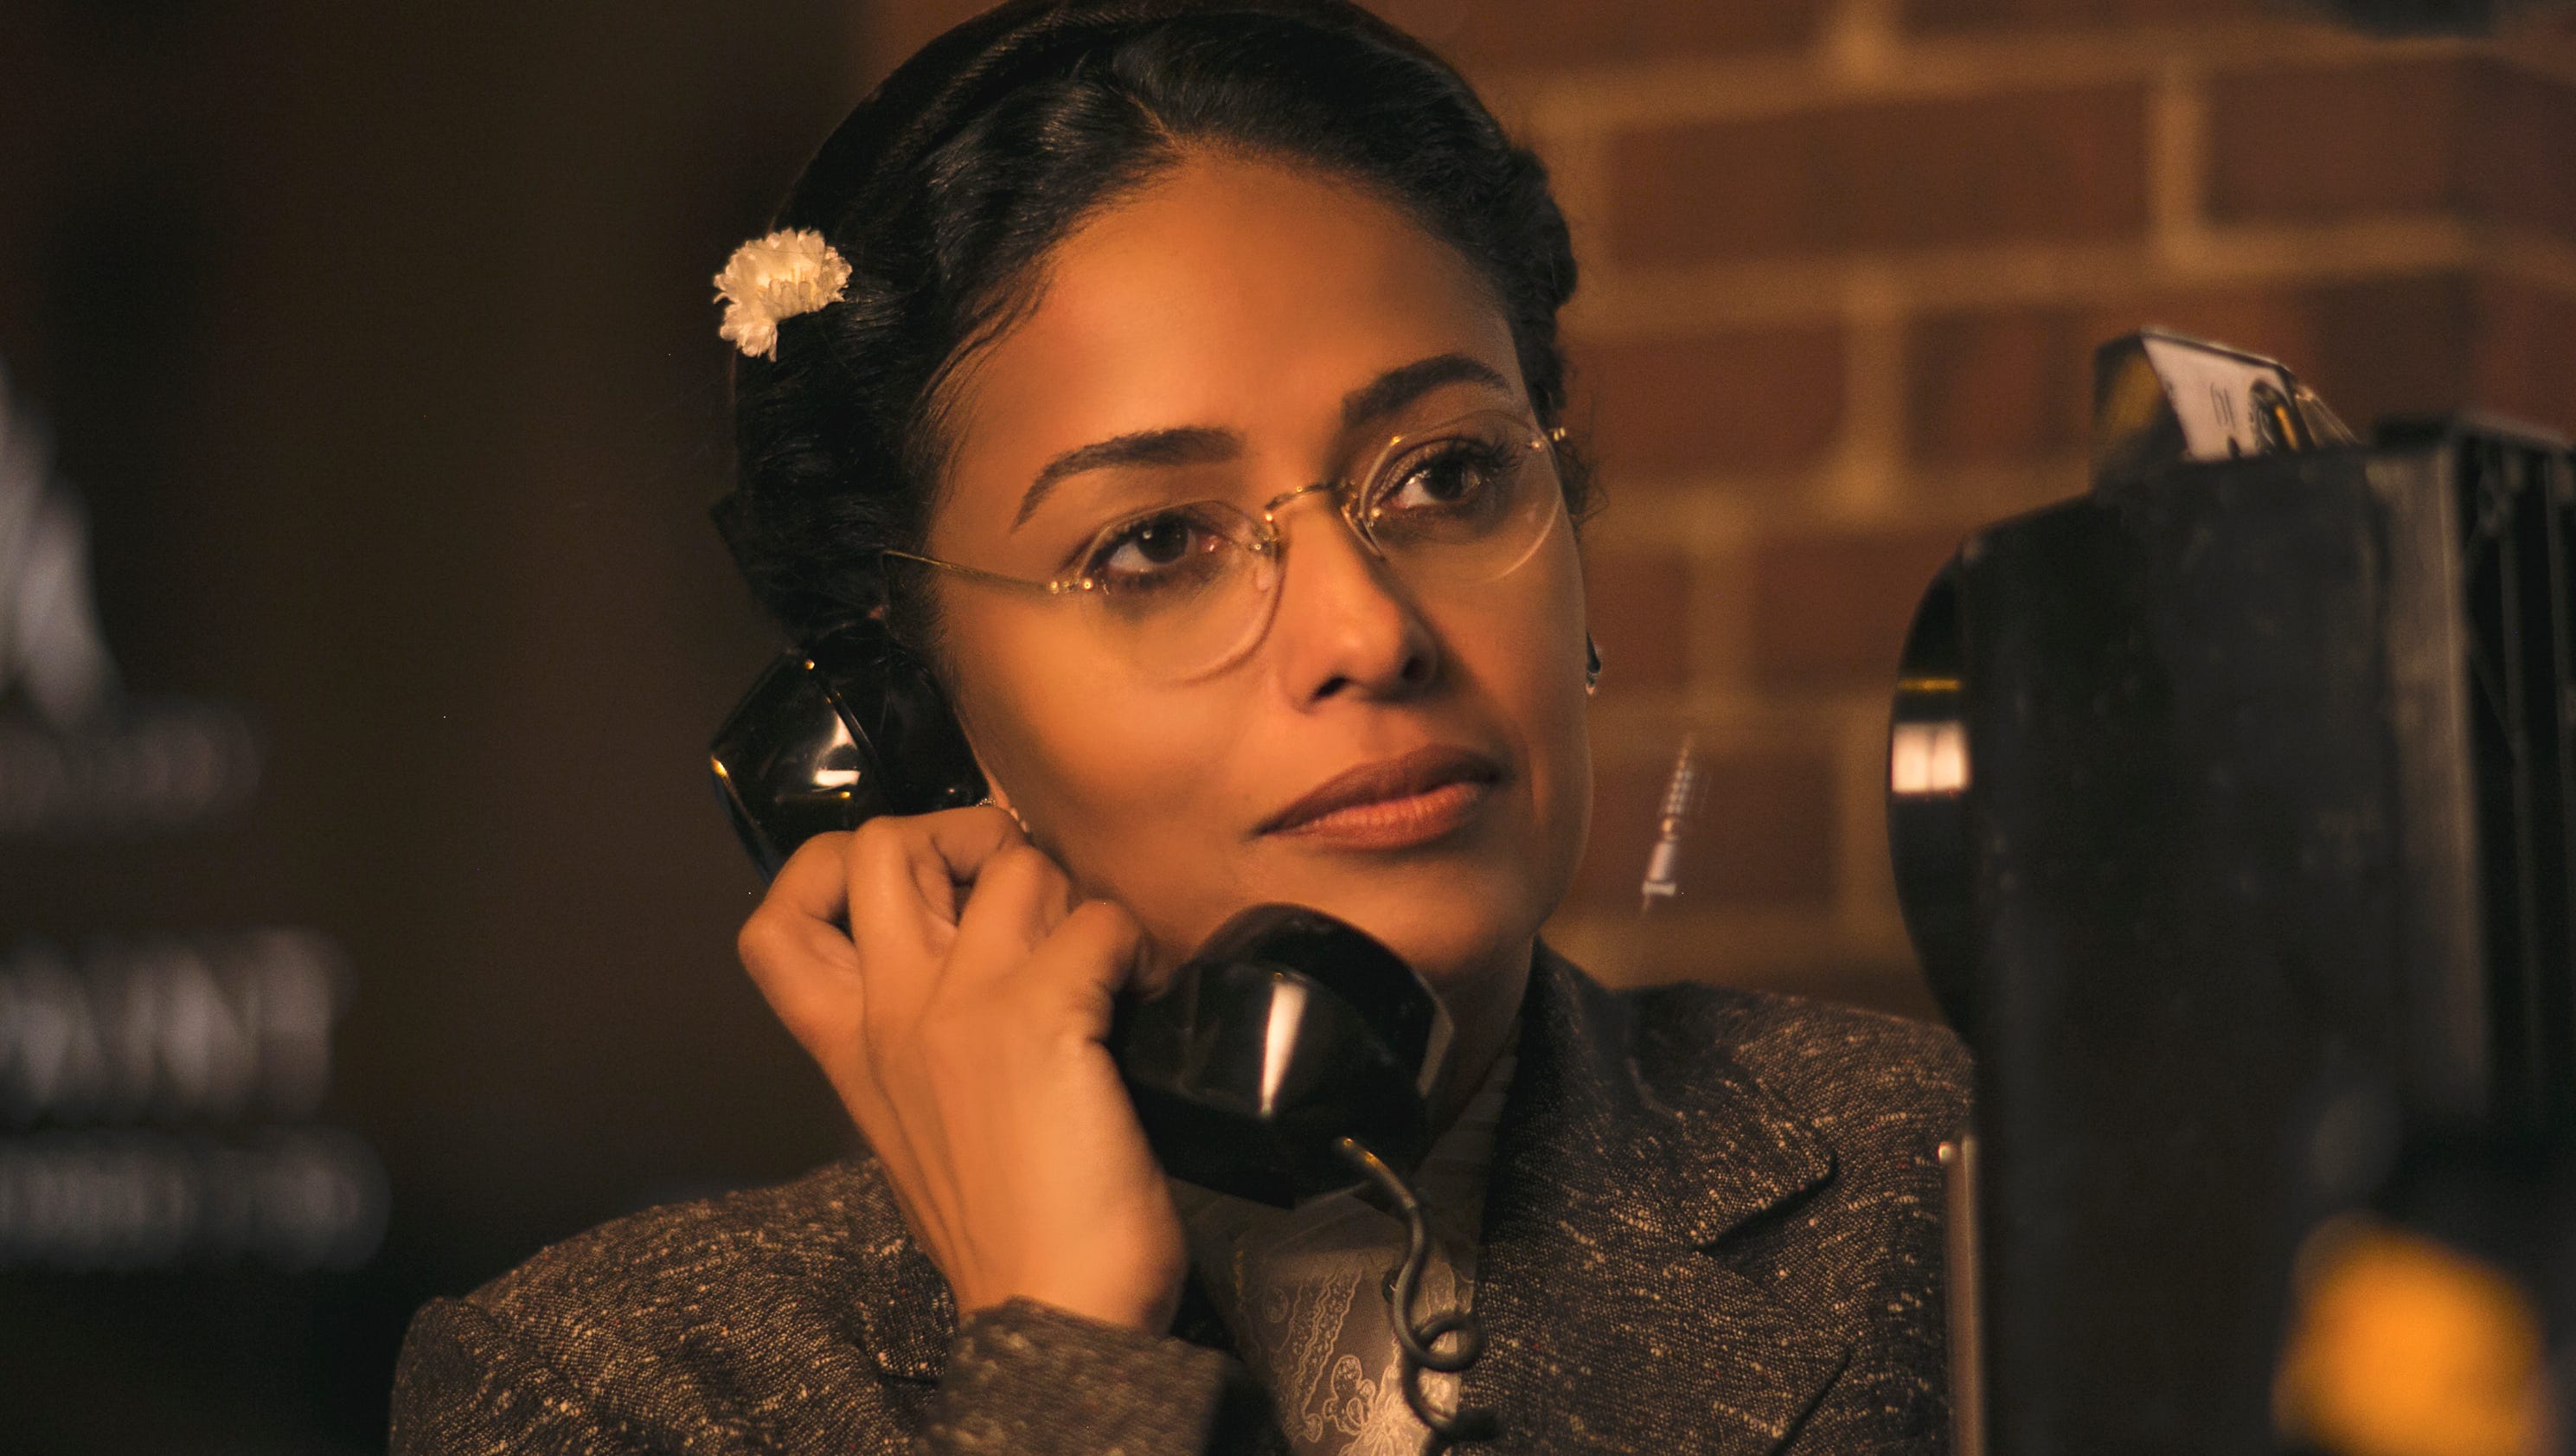 Playing Rosa Parks in TV movie gives Meta Golding 'honor ...